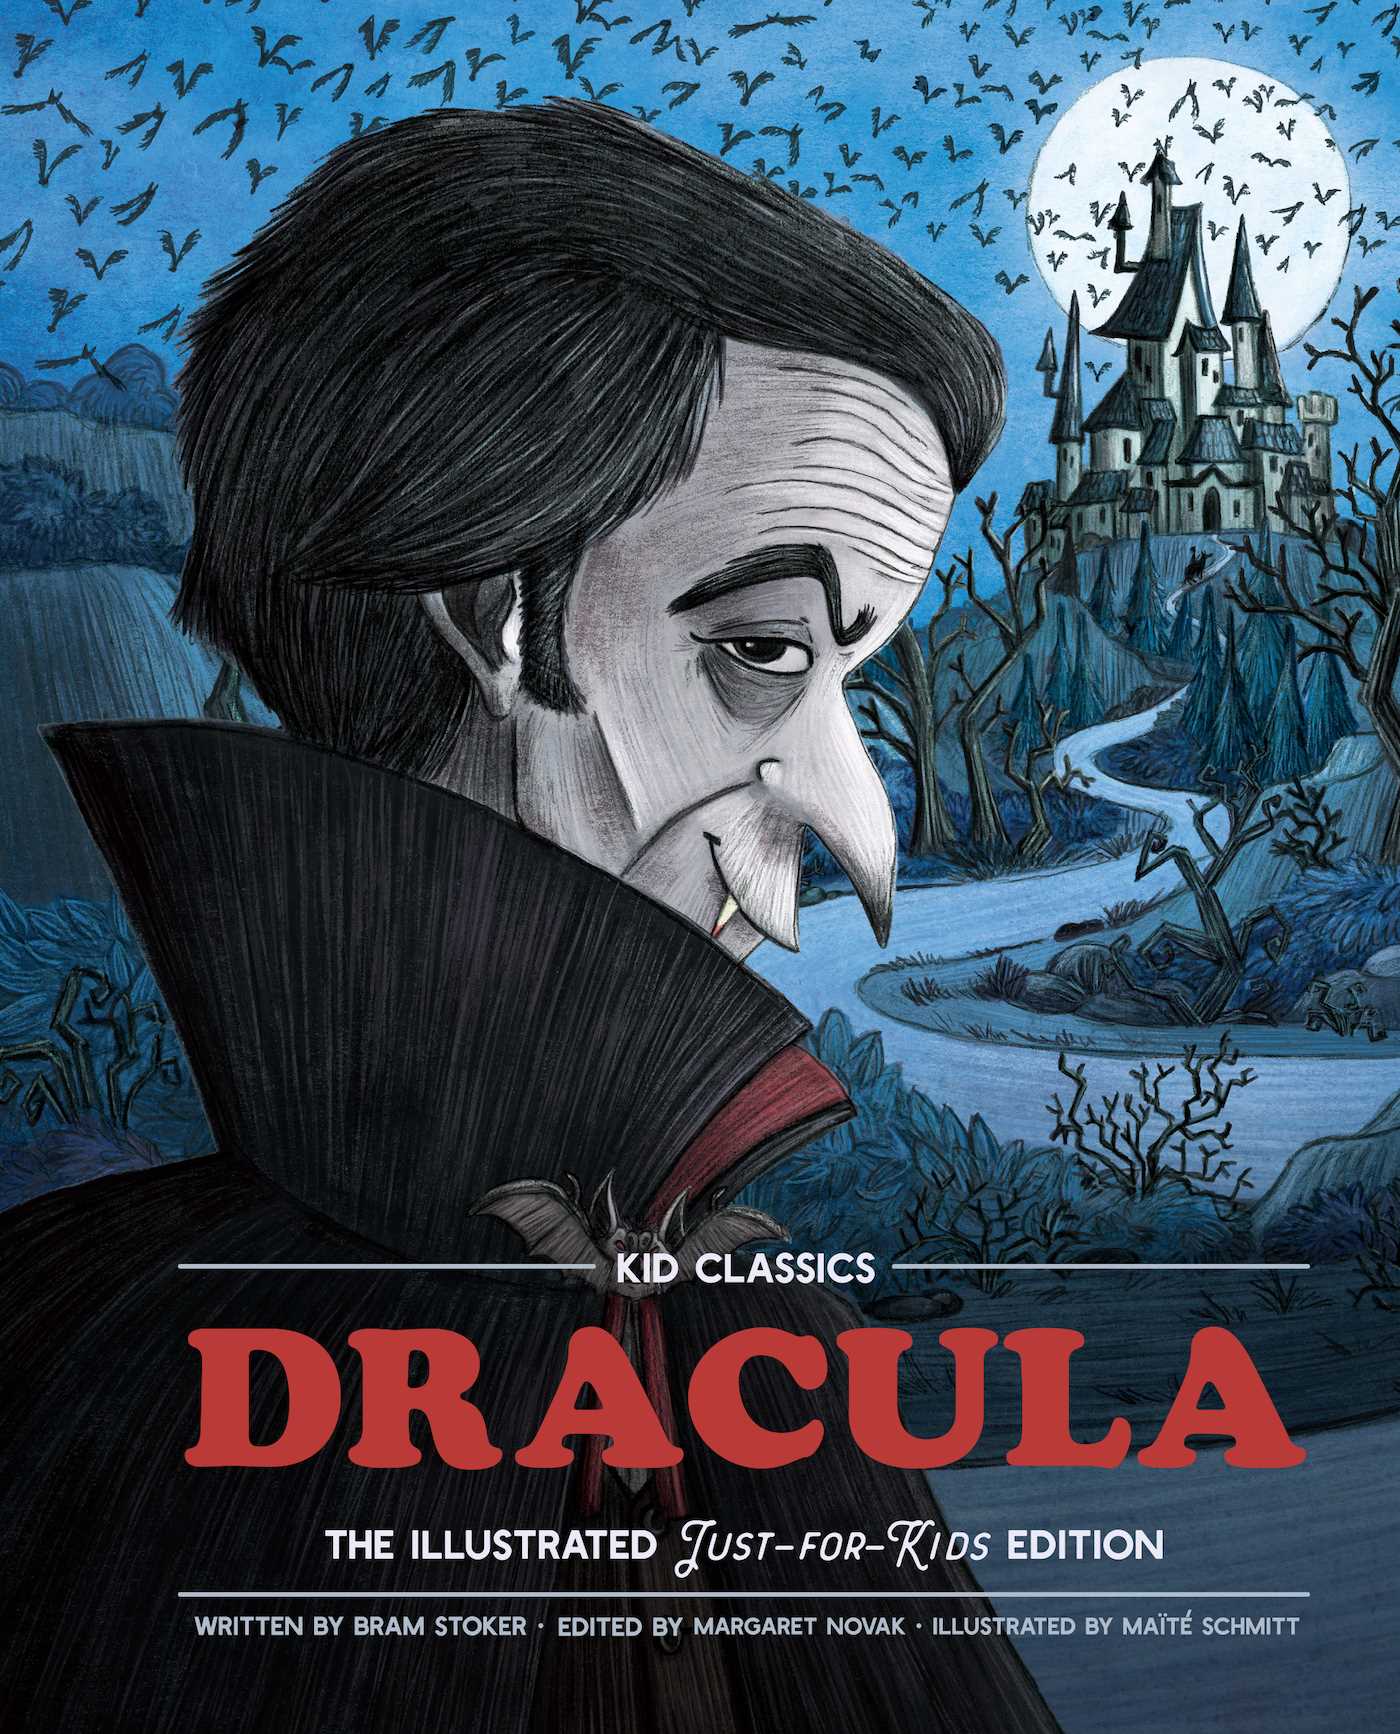 Dracula - Kid Classics: The Classic Edition Reimagined Just-for-Kids! (Kid Classic #2)